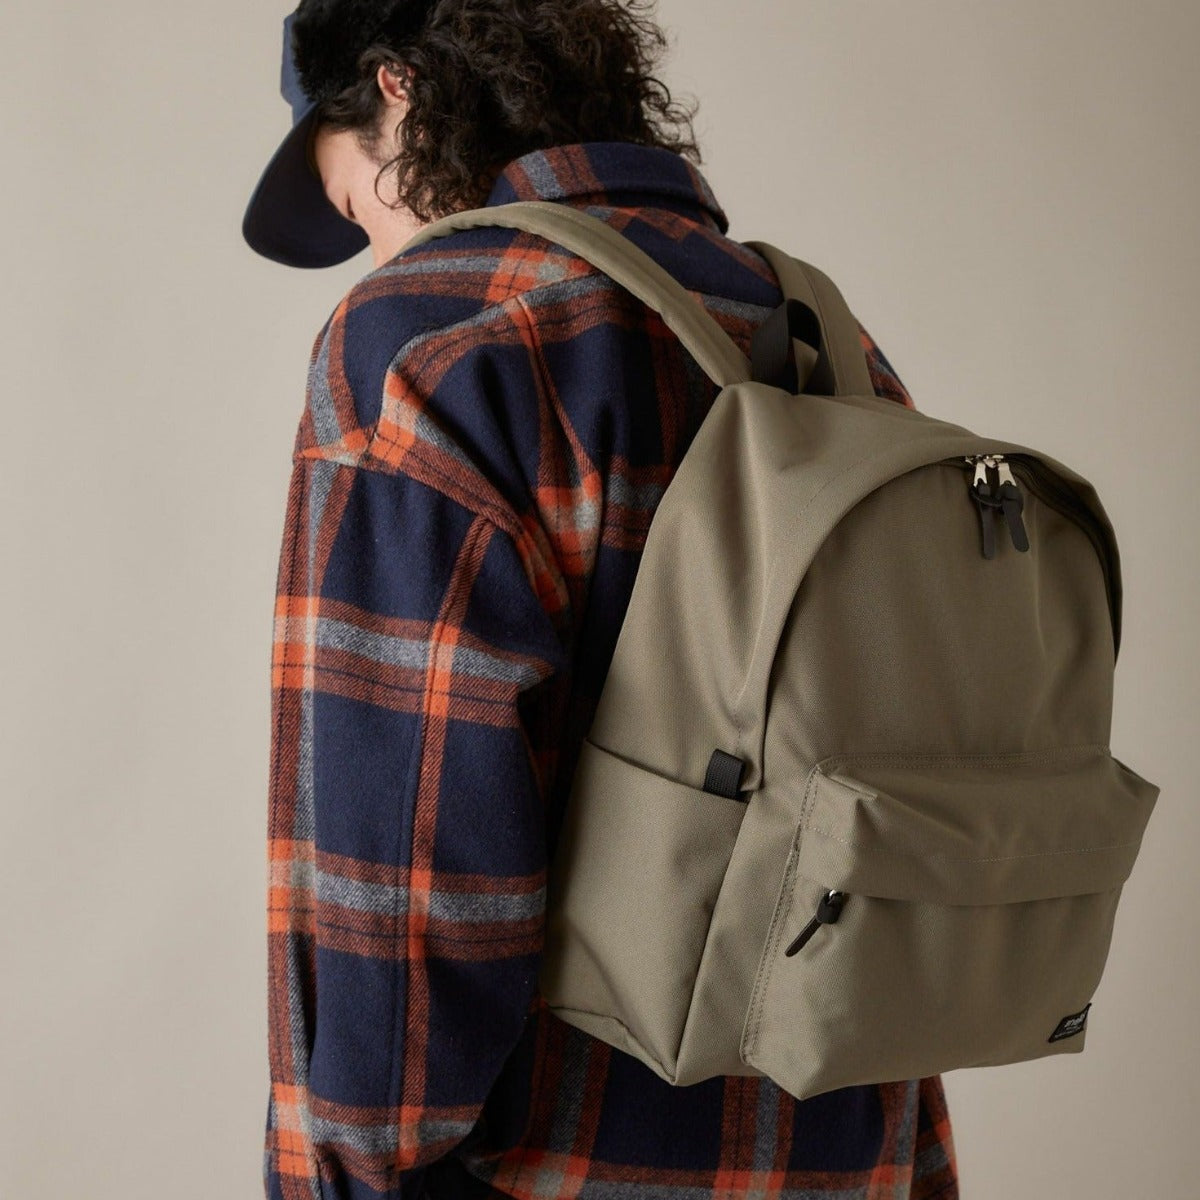 Anello Togo Backpack in Olive